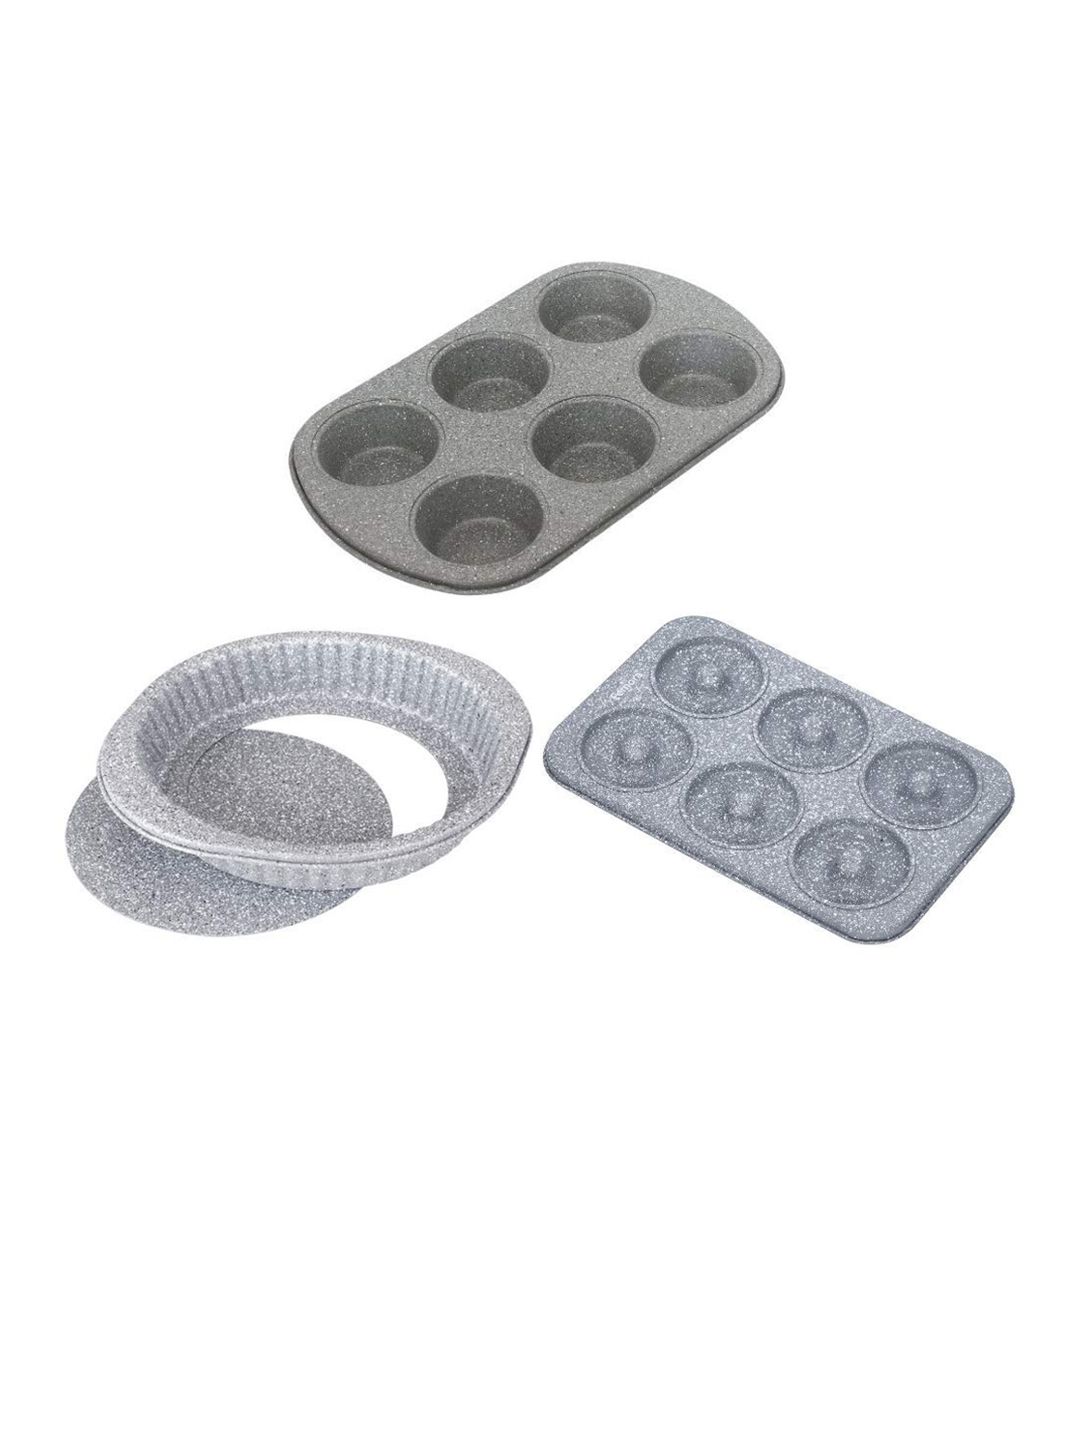 Femora Grey Set of 2 Stone Ware Non-Stick Coated Baking Mould Price in India